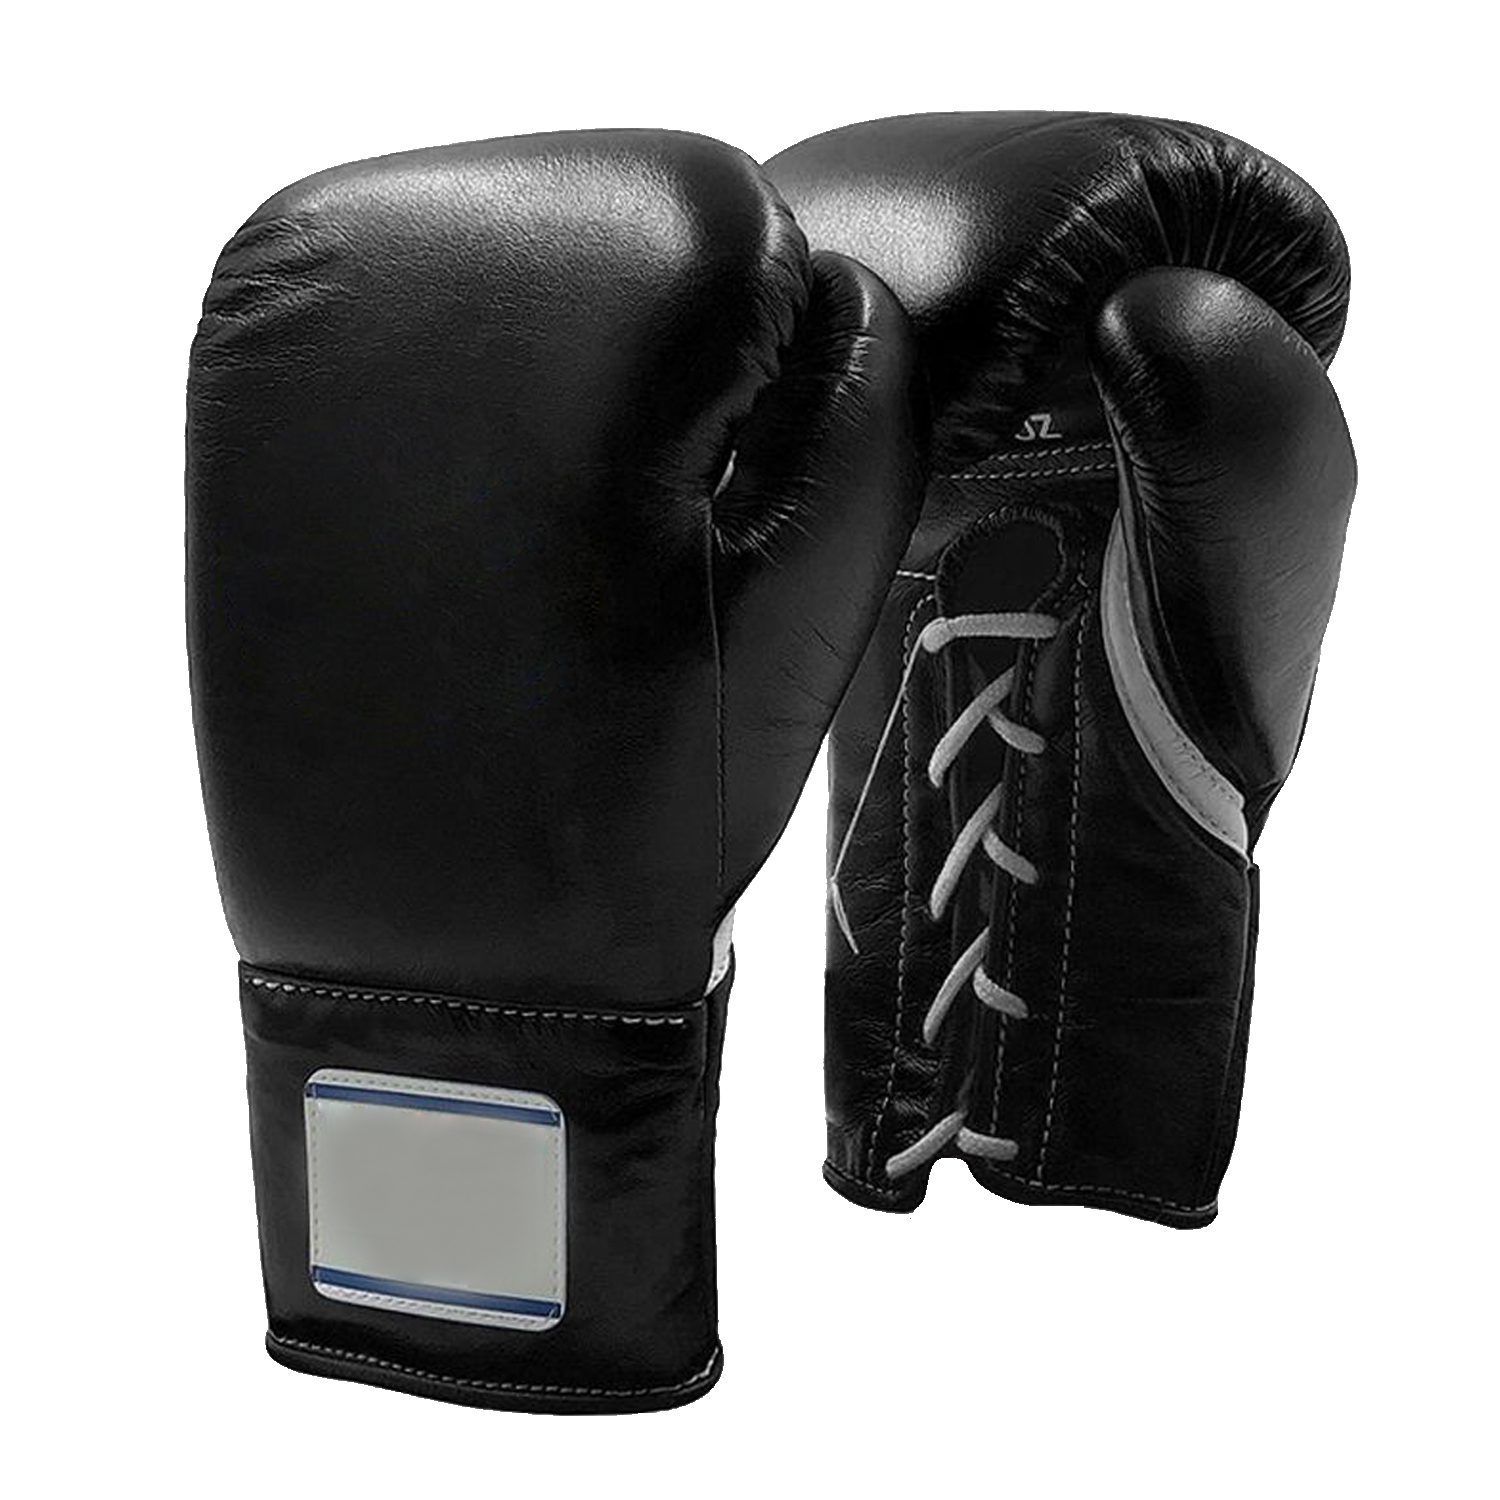 Black women’s boxing gloves with secure wrist closure.